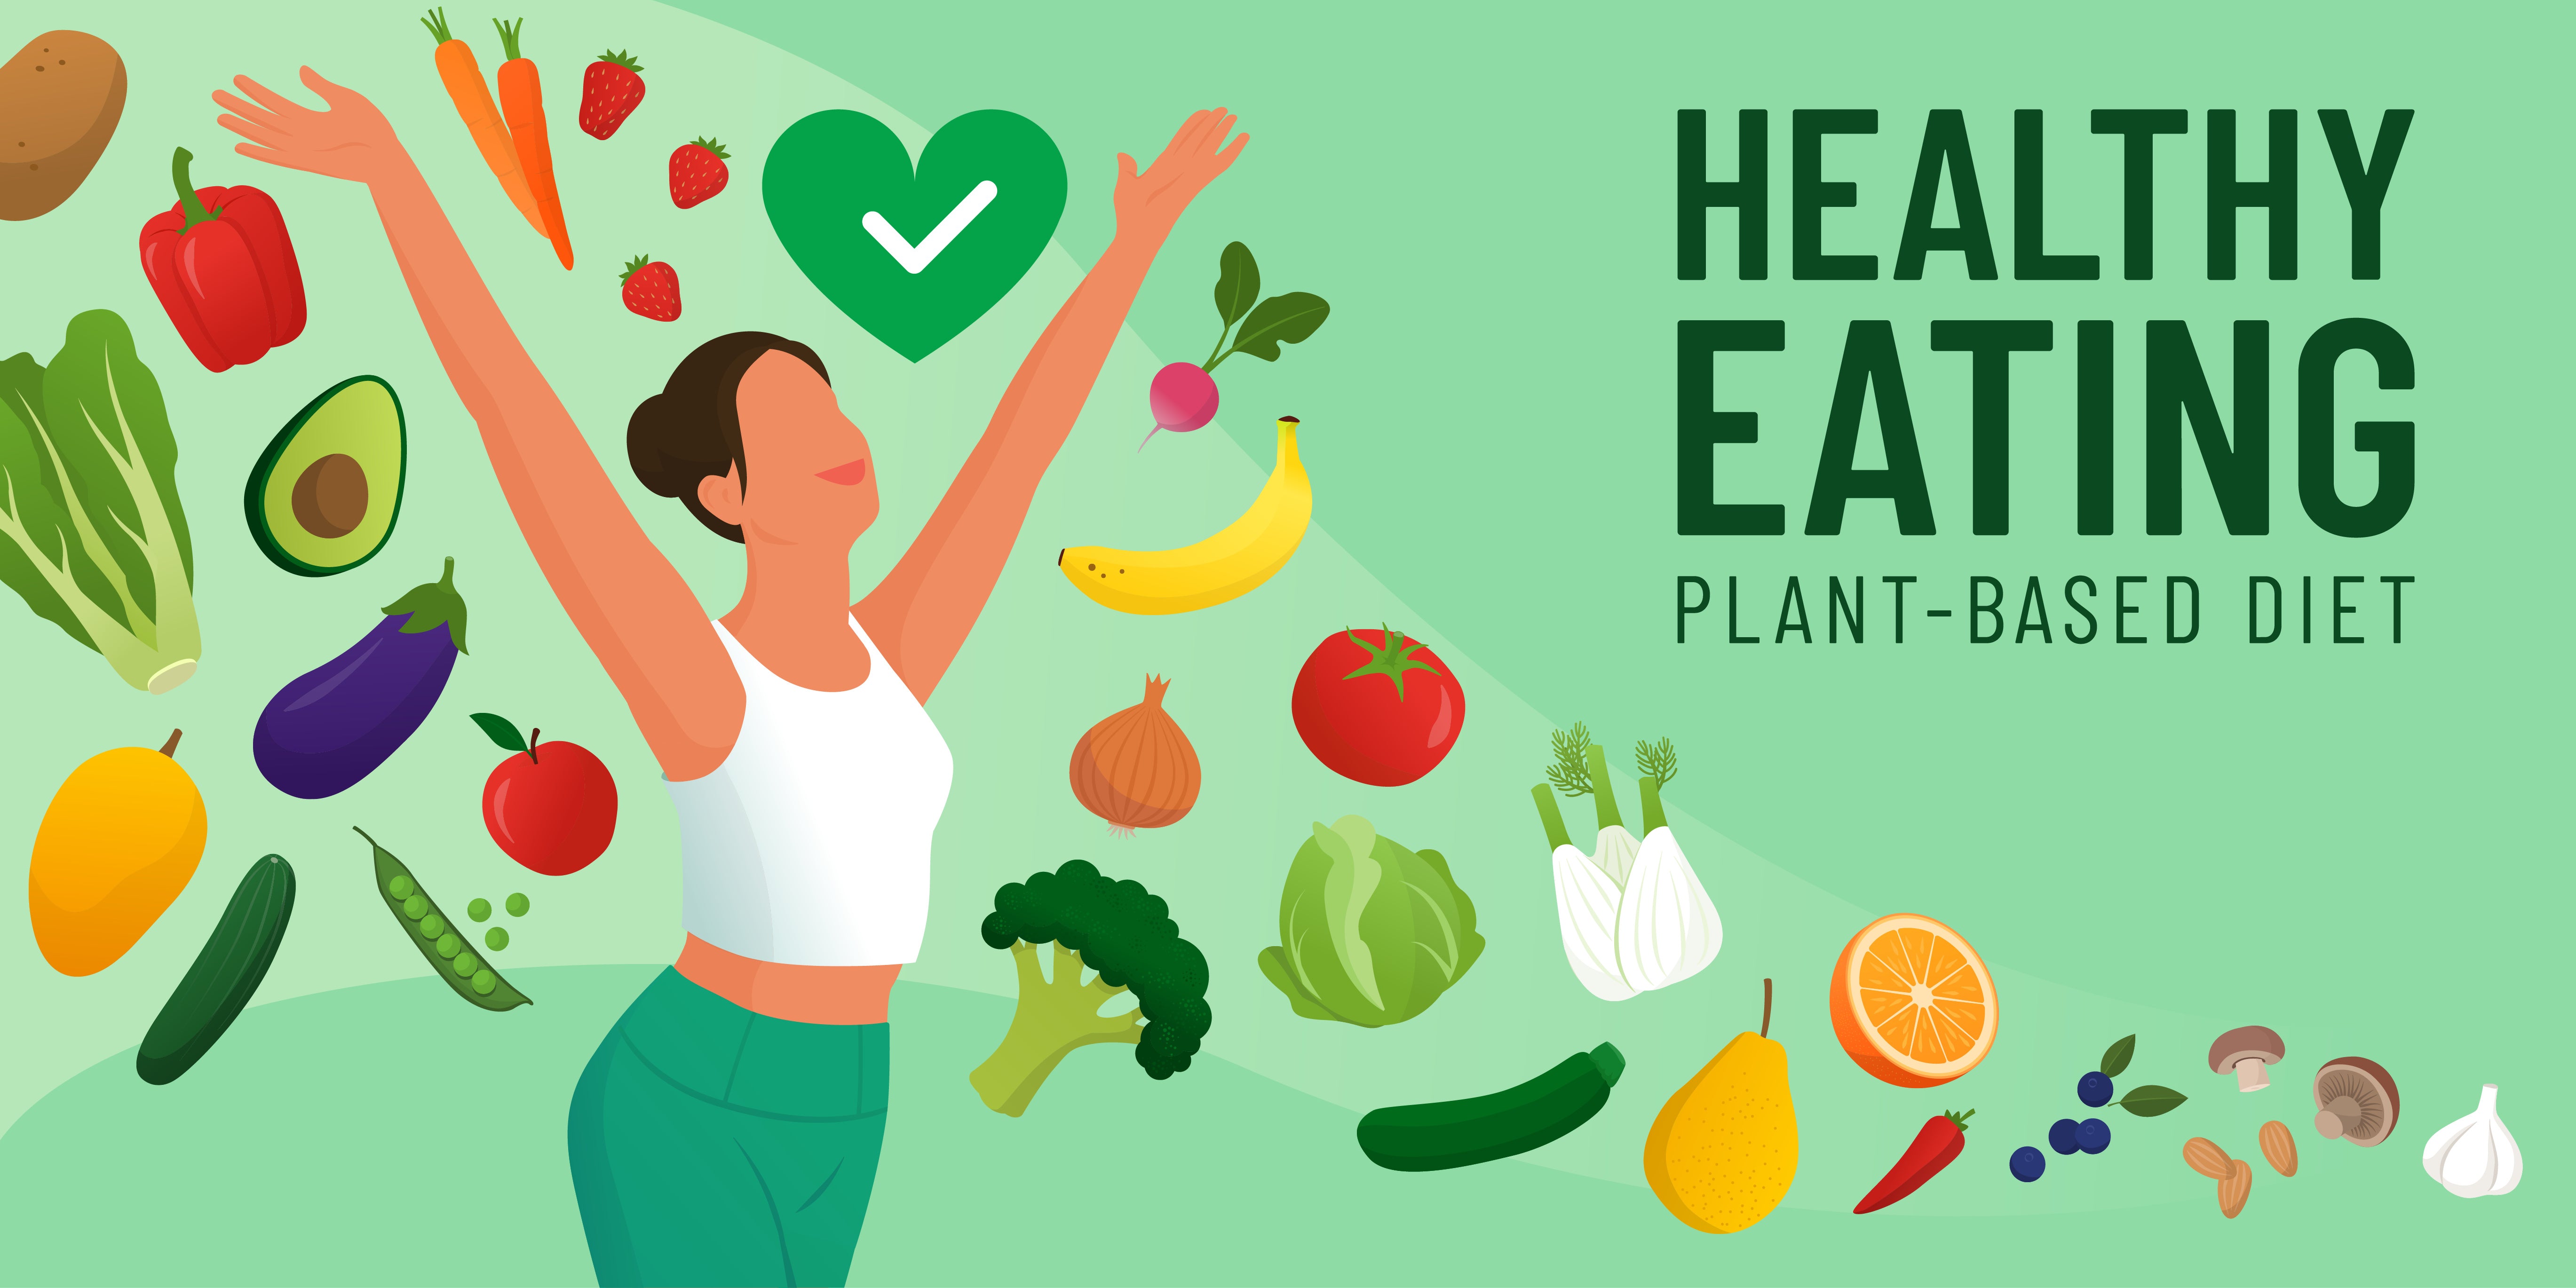 Can a Plant-Based Diet Really Improve Our Health? [Examining Evidence]